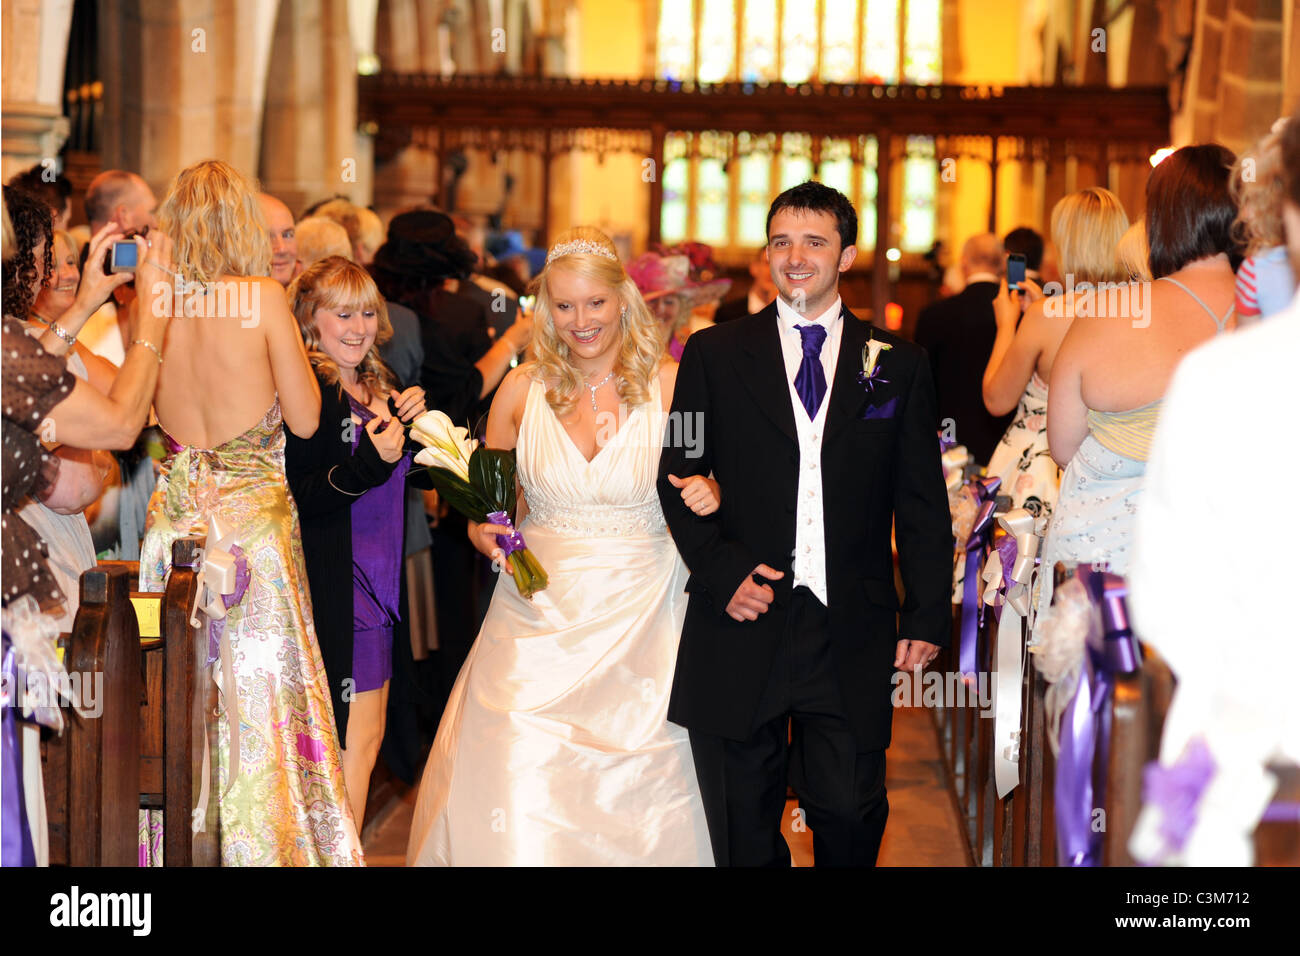 A newly married couple walk back down the aisle after getting married. Stock Photo